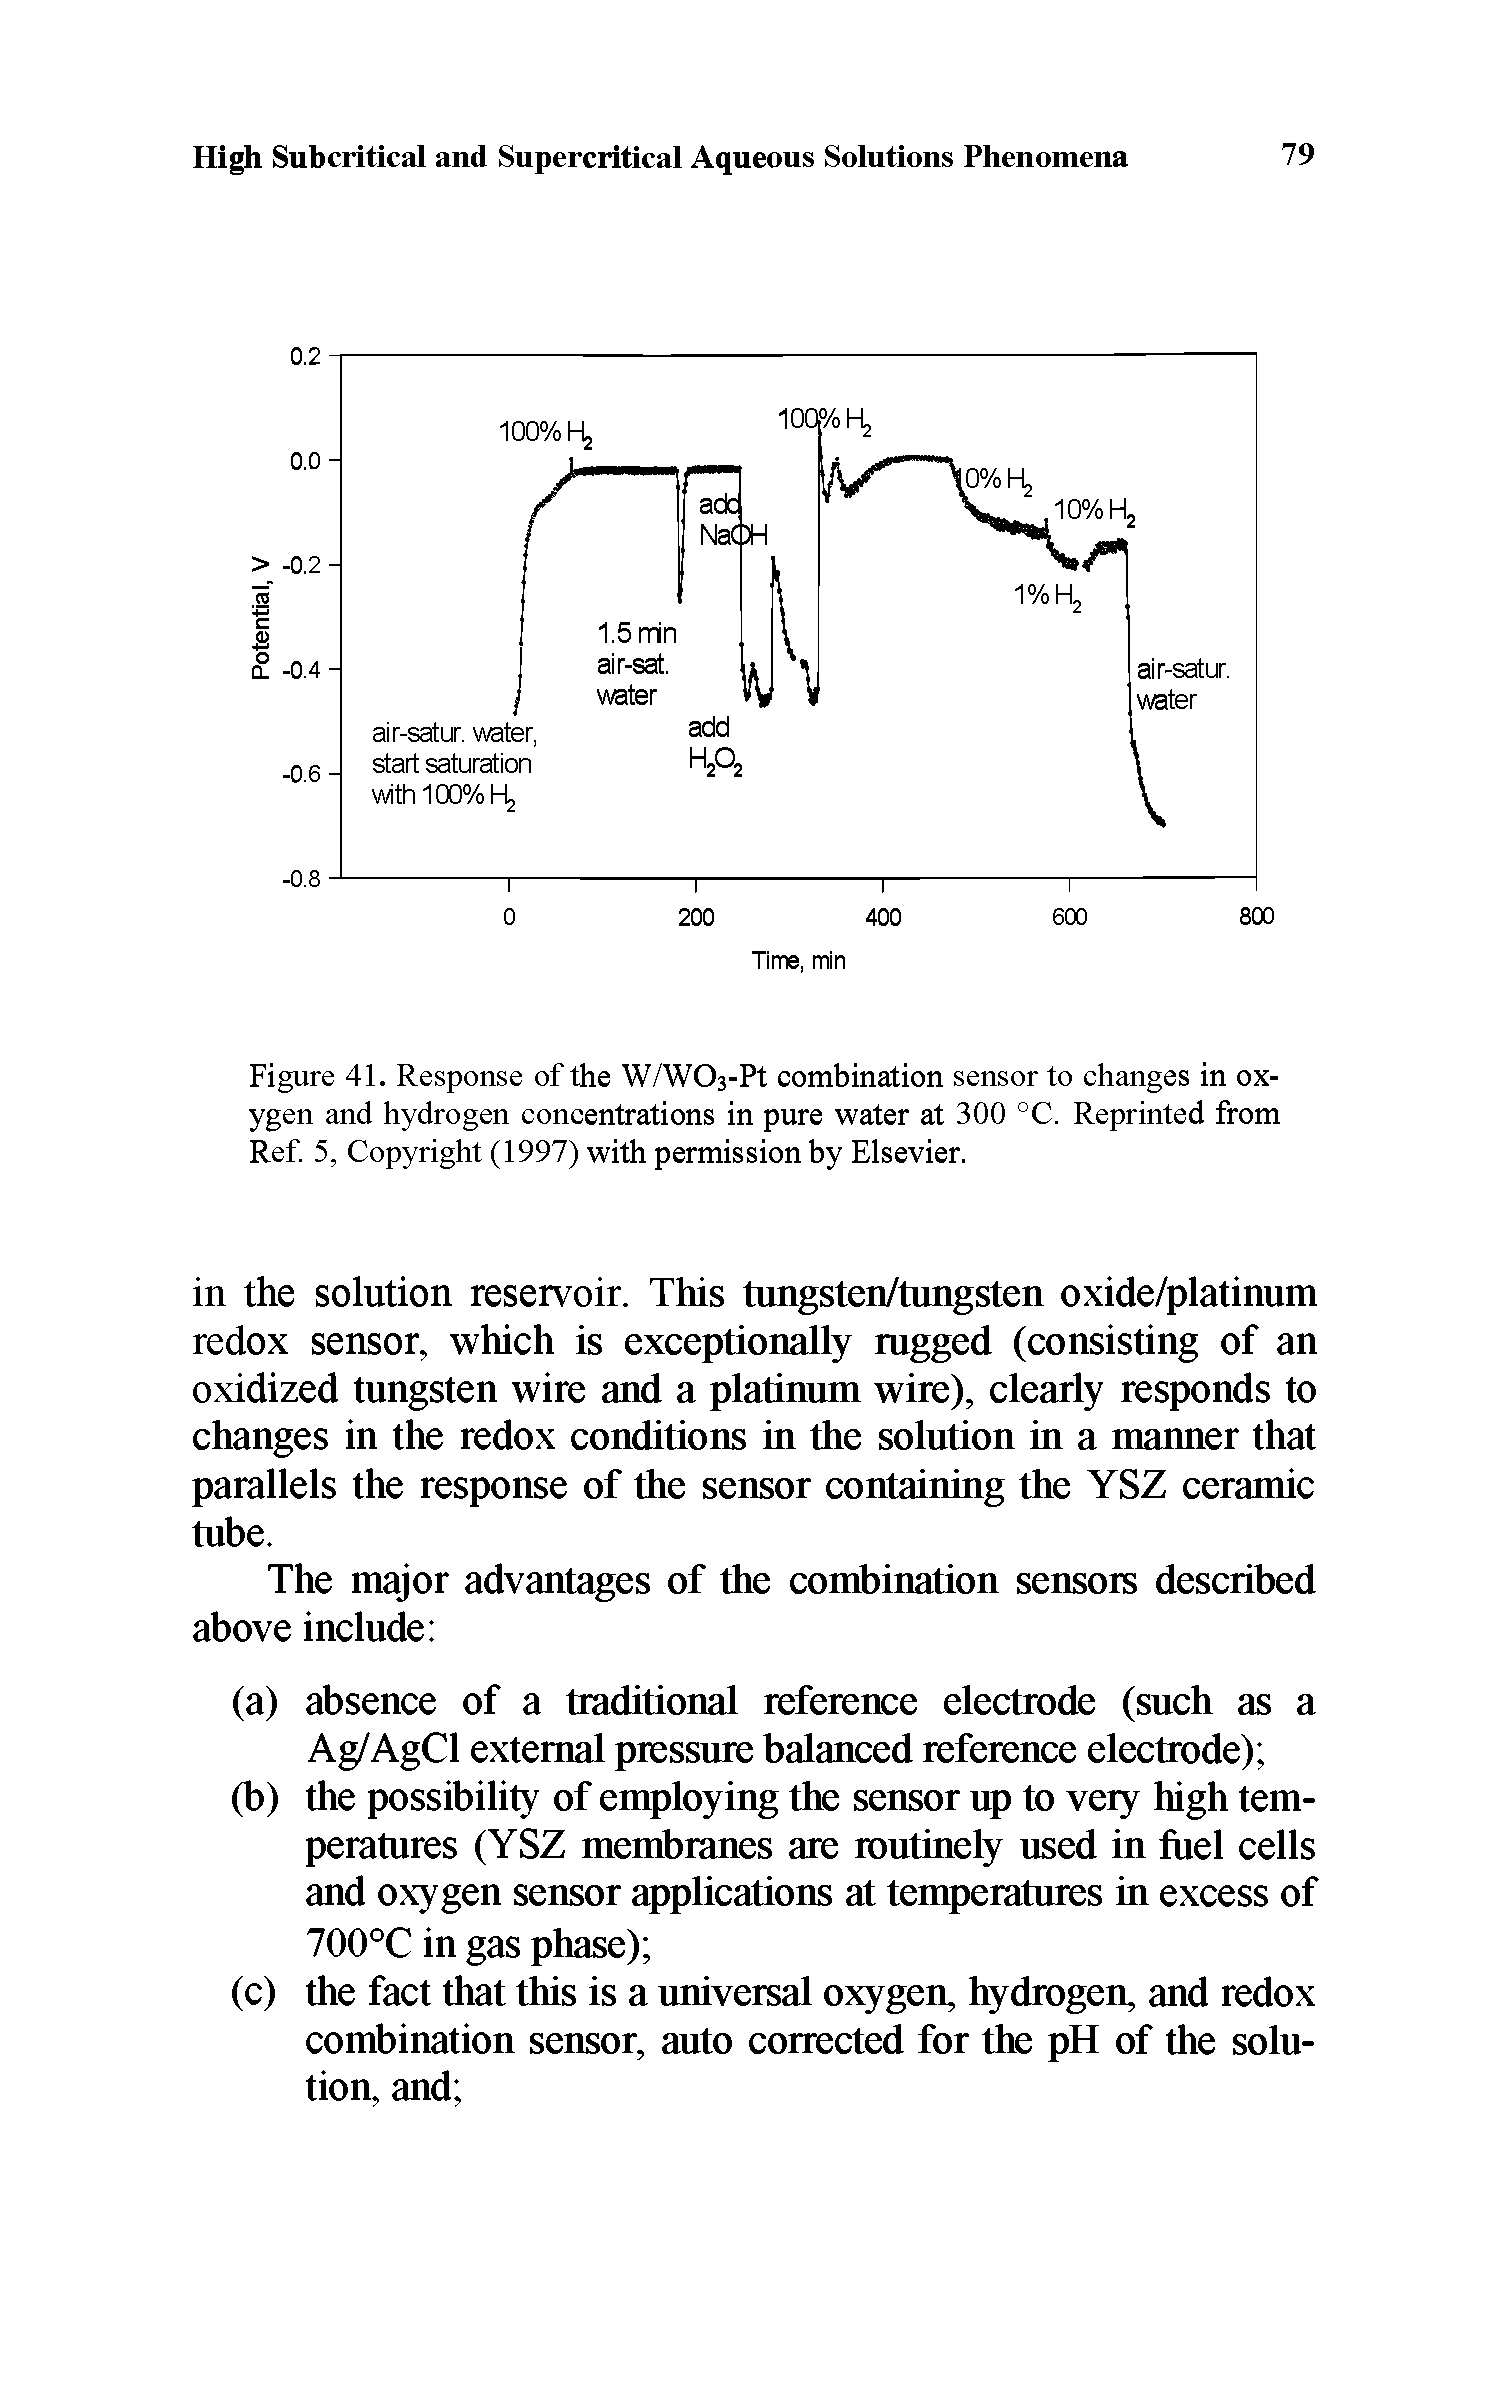 Figure 41. Response of the W/WOs-Pt combination sensor to changes in oxygen and hydrogen concentrations in pure water at 300 °C. Reprinted from Ref 5, Copyright (1997) with permission by Elsevier.